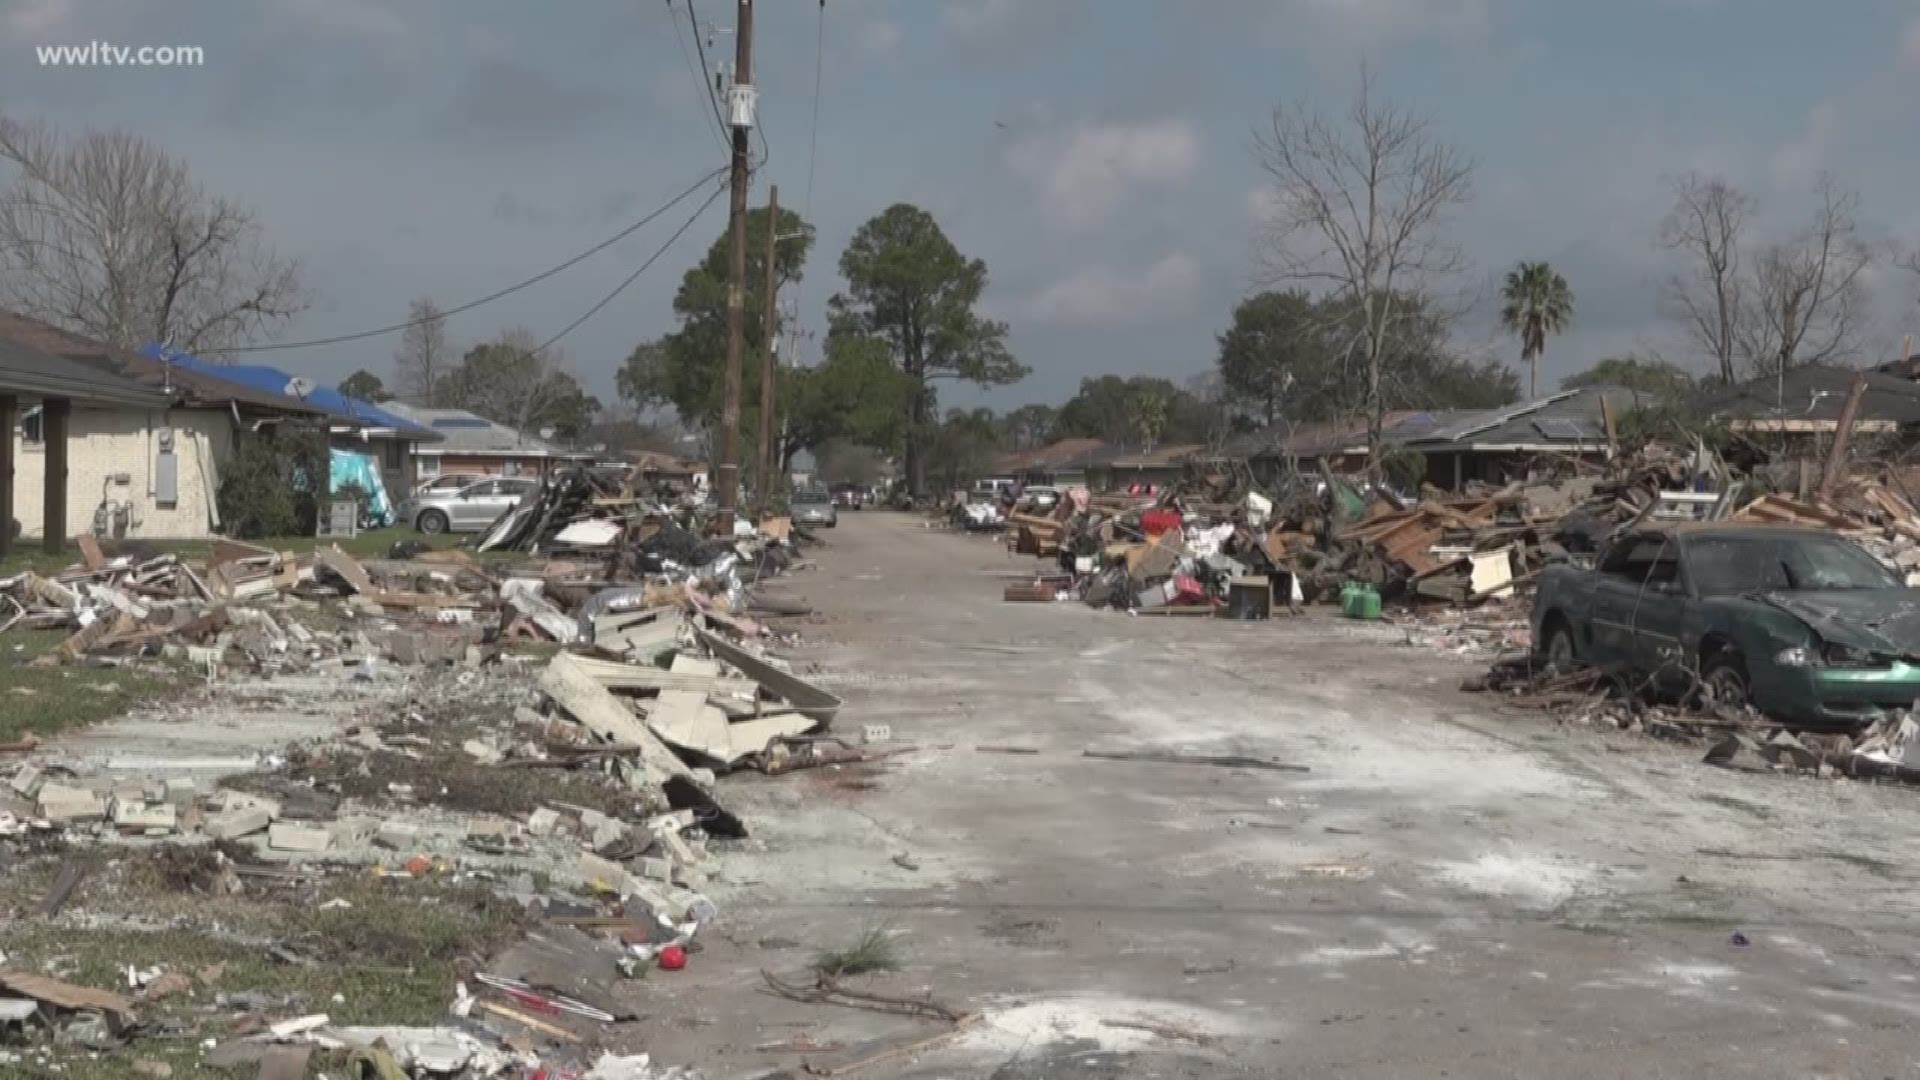 New roofs, new homes and new buildings. Two years later, New Orleans East has made a major comeback since an EF-3 tornado touched down, but there's still a long way to go.